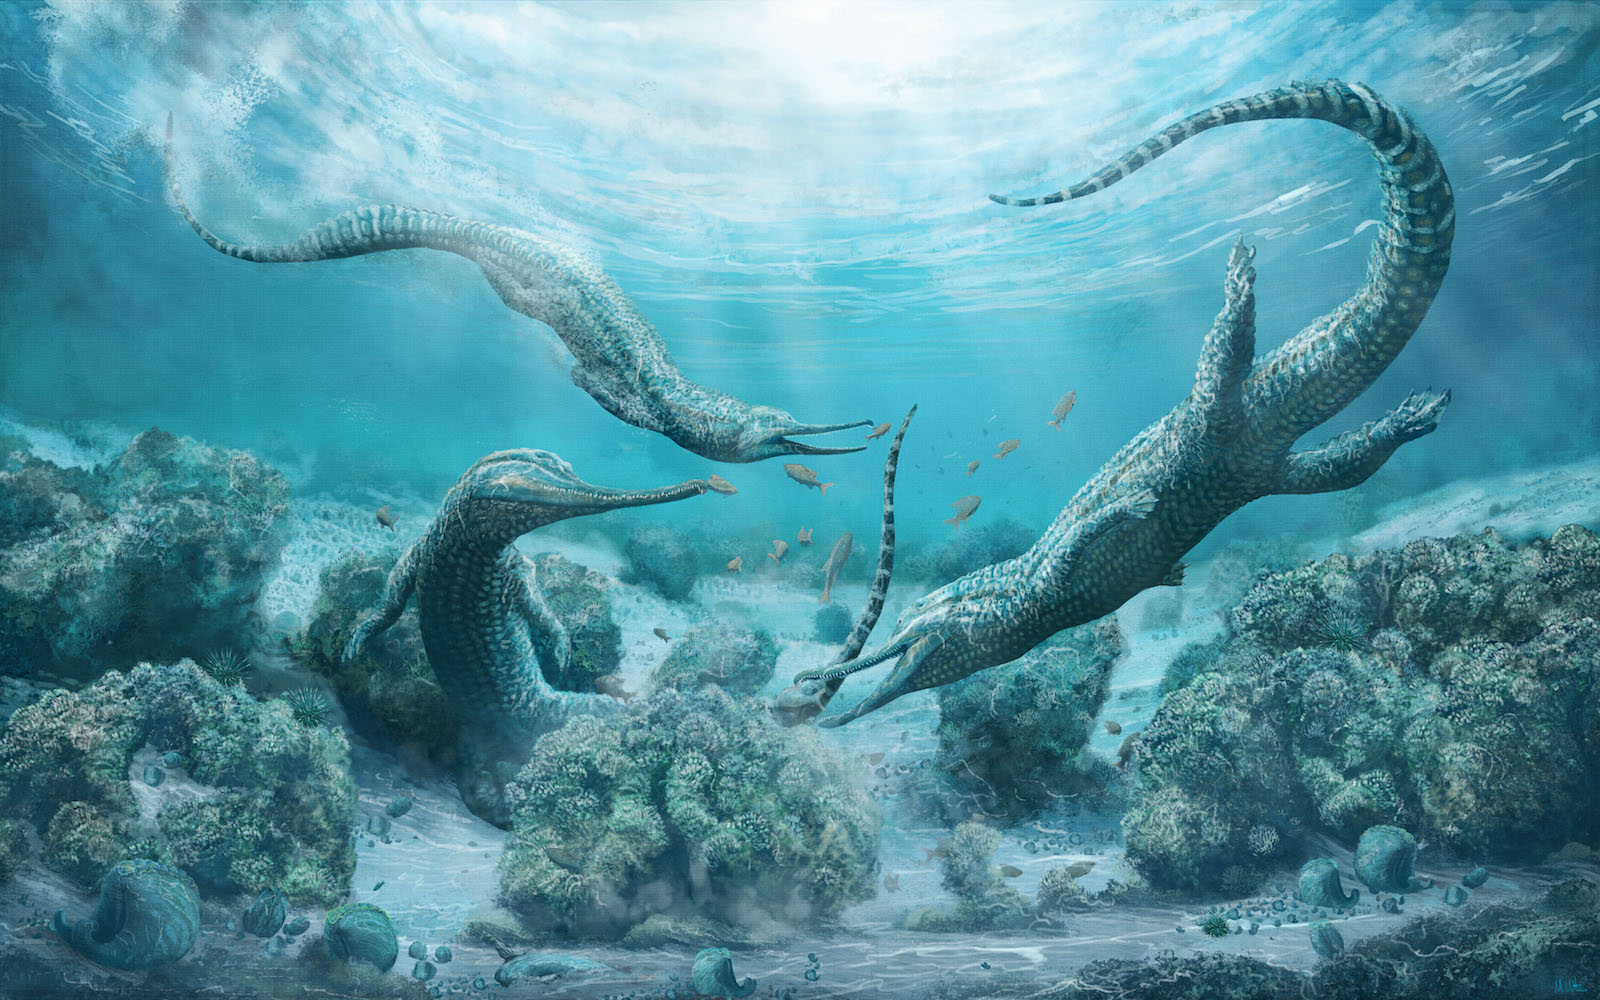 Car-Size 'Sea Monster' Terrorized Triassic Oceans | Live Science